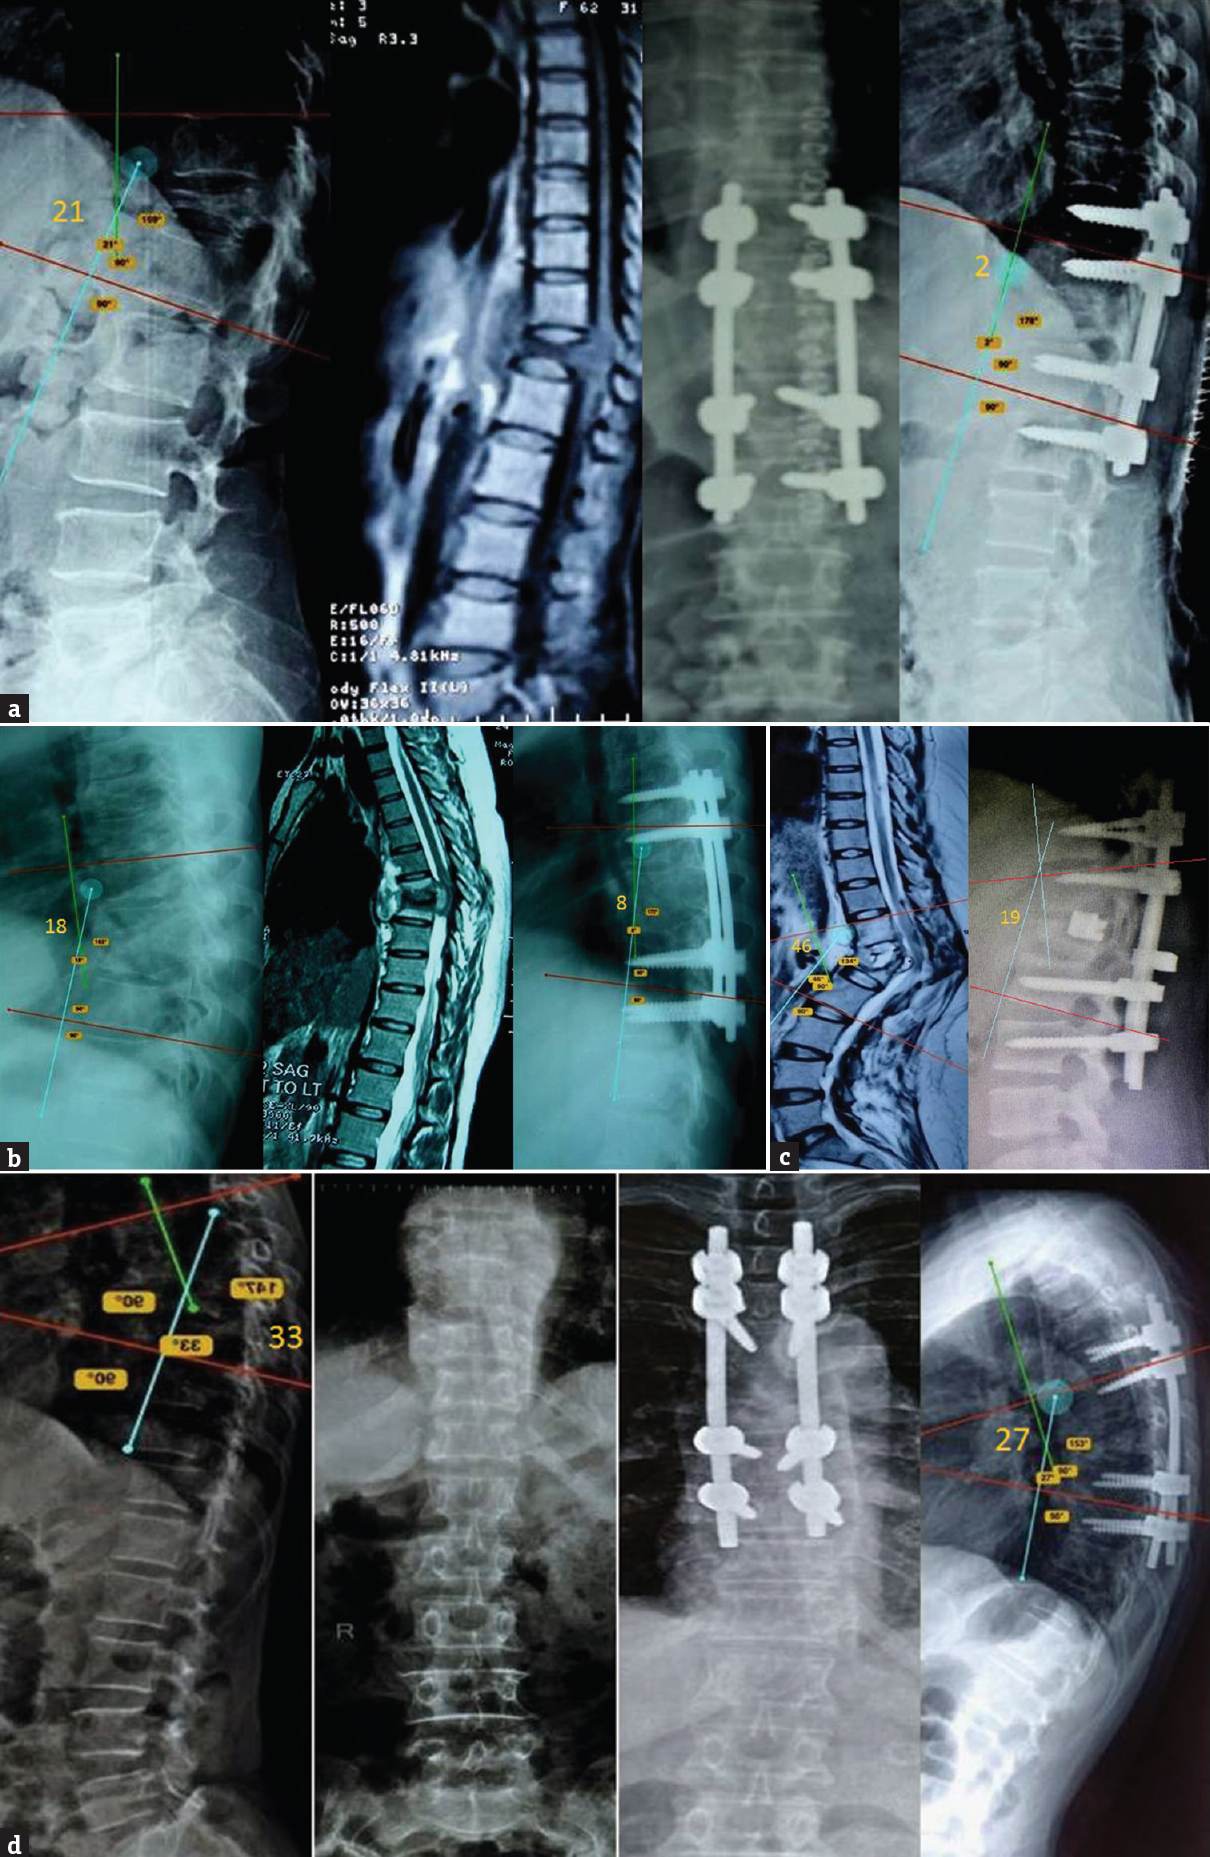 (a-d) Imaging profile of some patients showing the preoperative and postoperative pictures